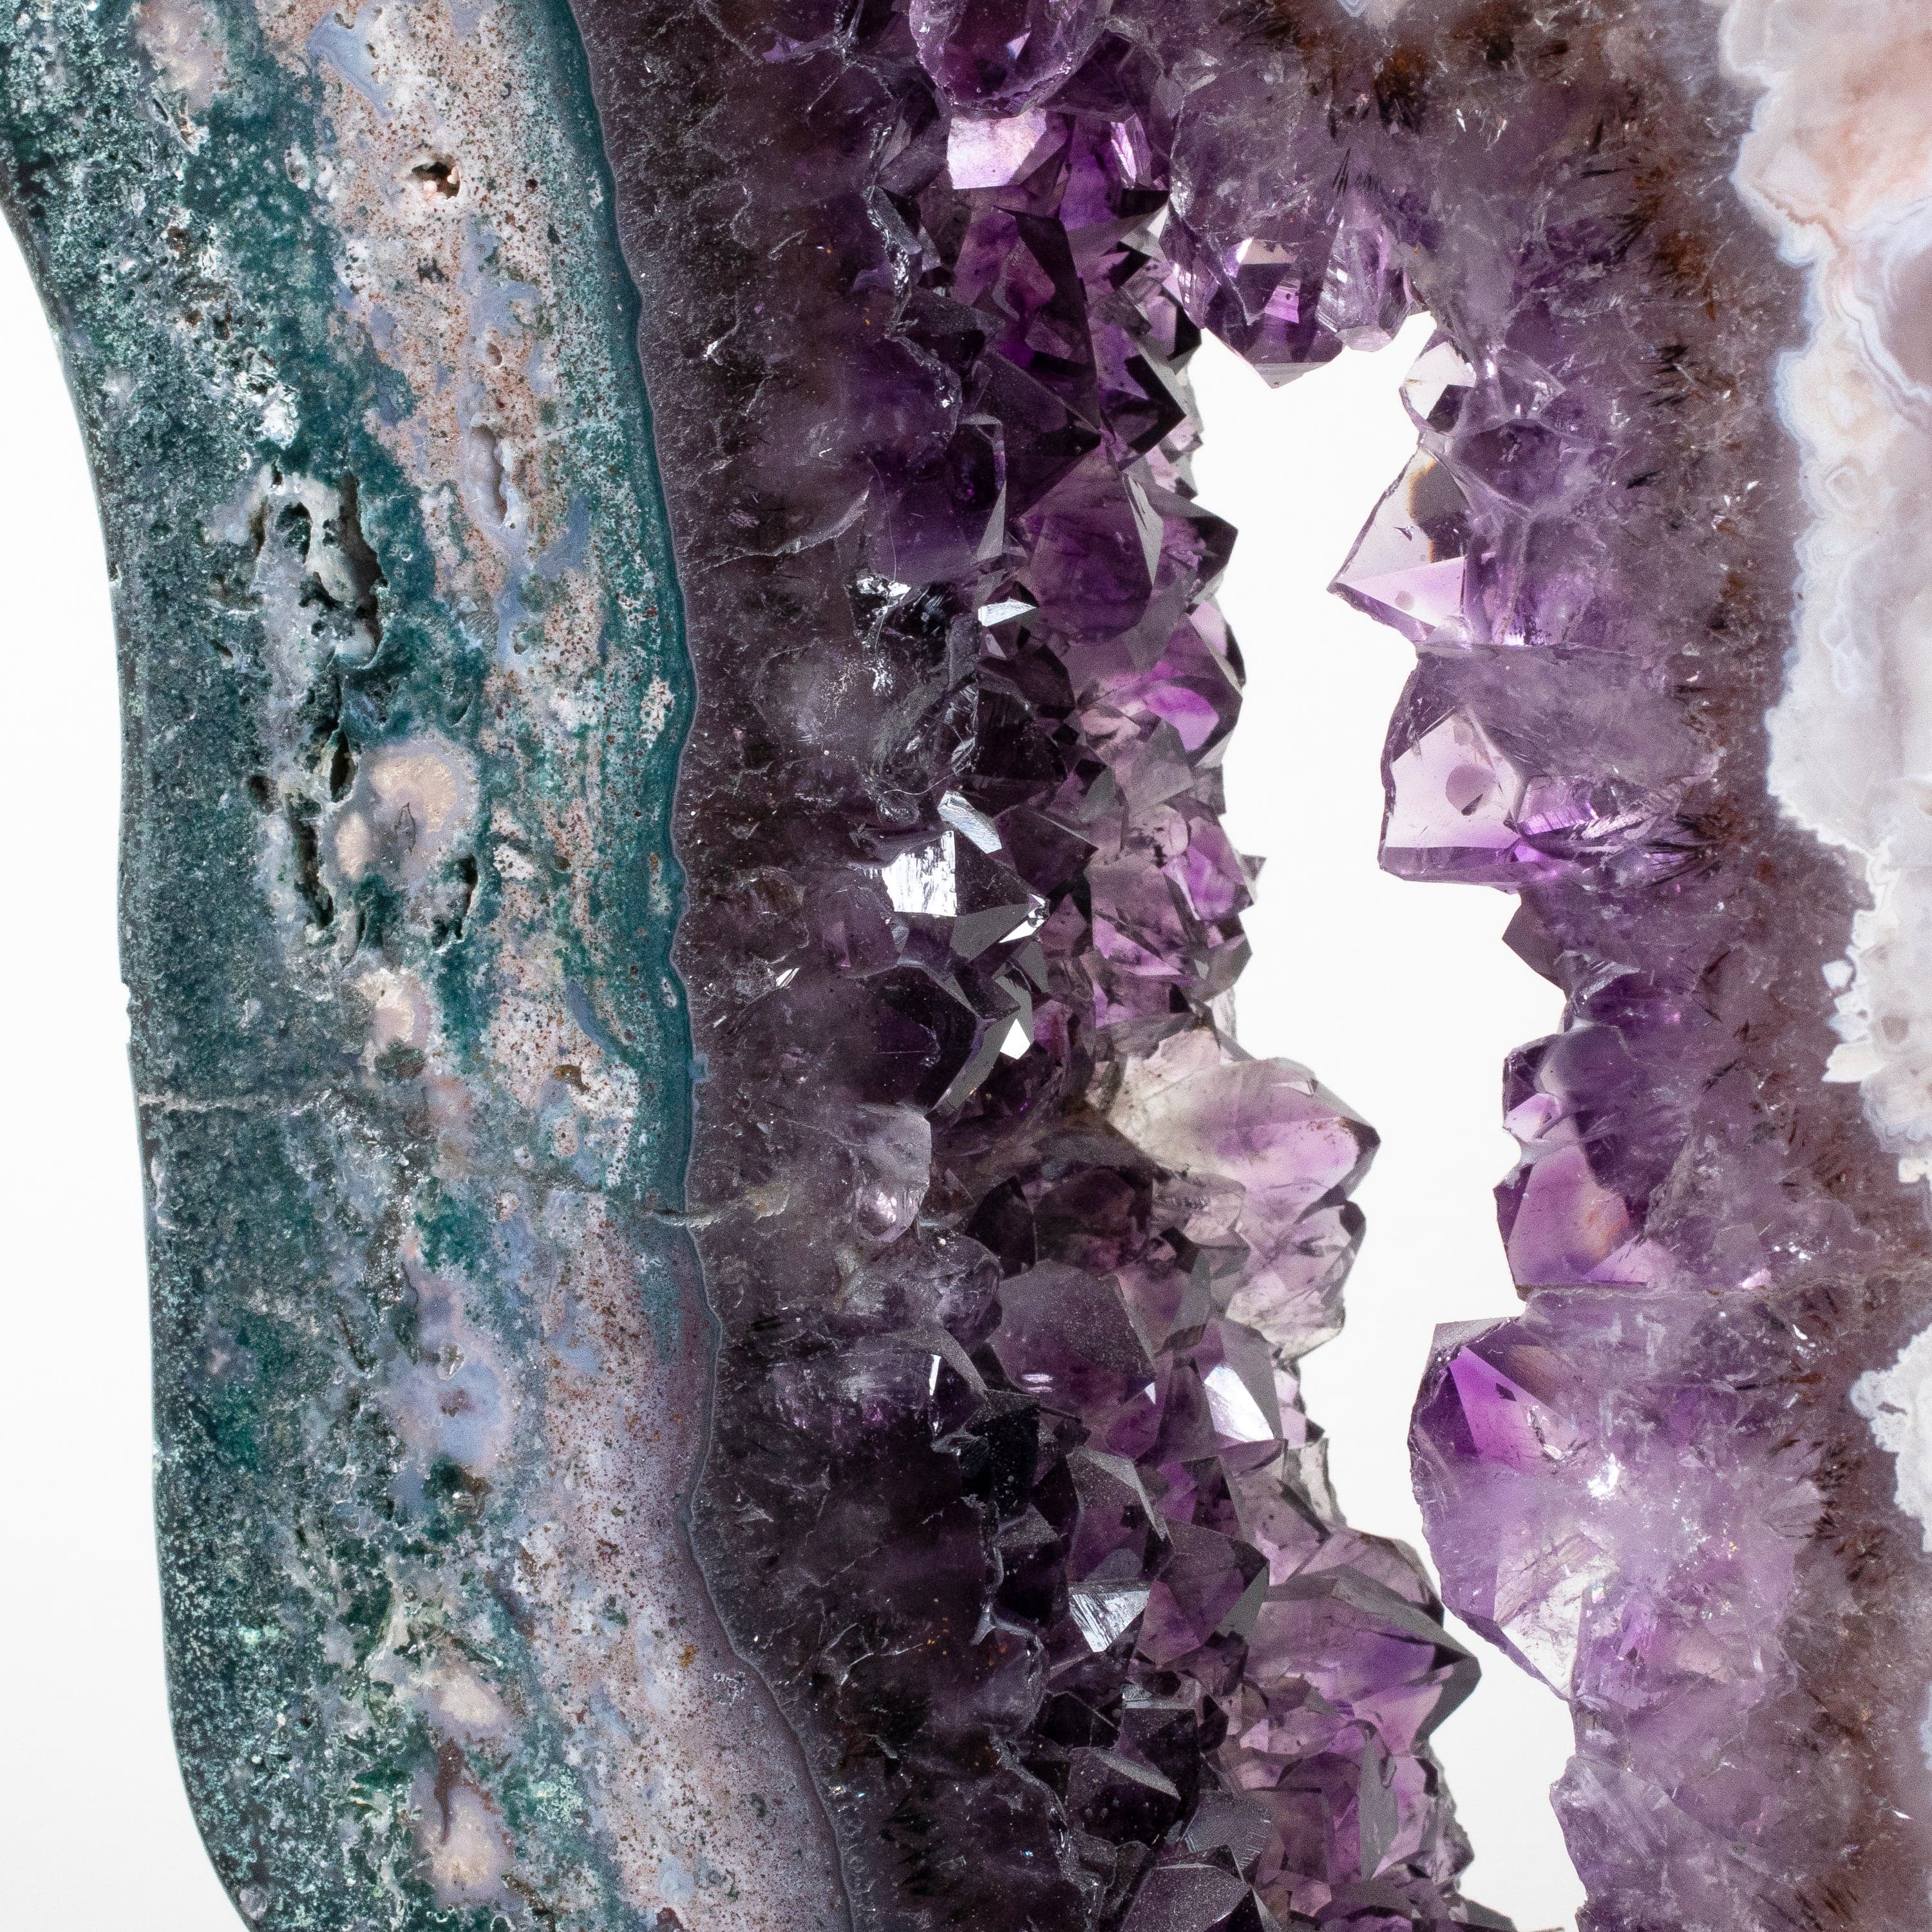 Kalifano Amethyst Amethyst Geode Wings from Brazil on Custom Stand- 38" / 44 lbs BAG8000.008